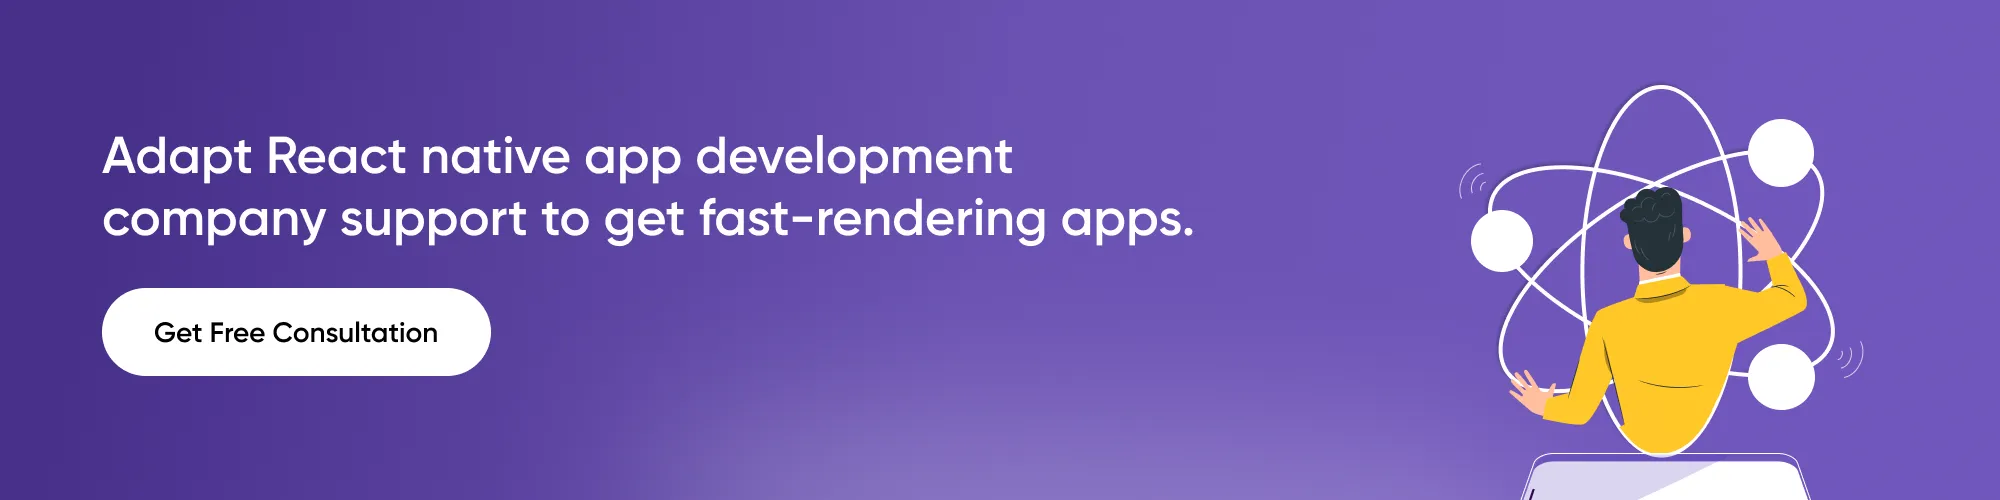 CTA_ Adapt React native app development company support to get fast-rendering apps